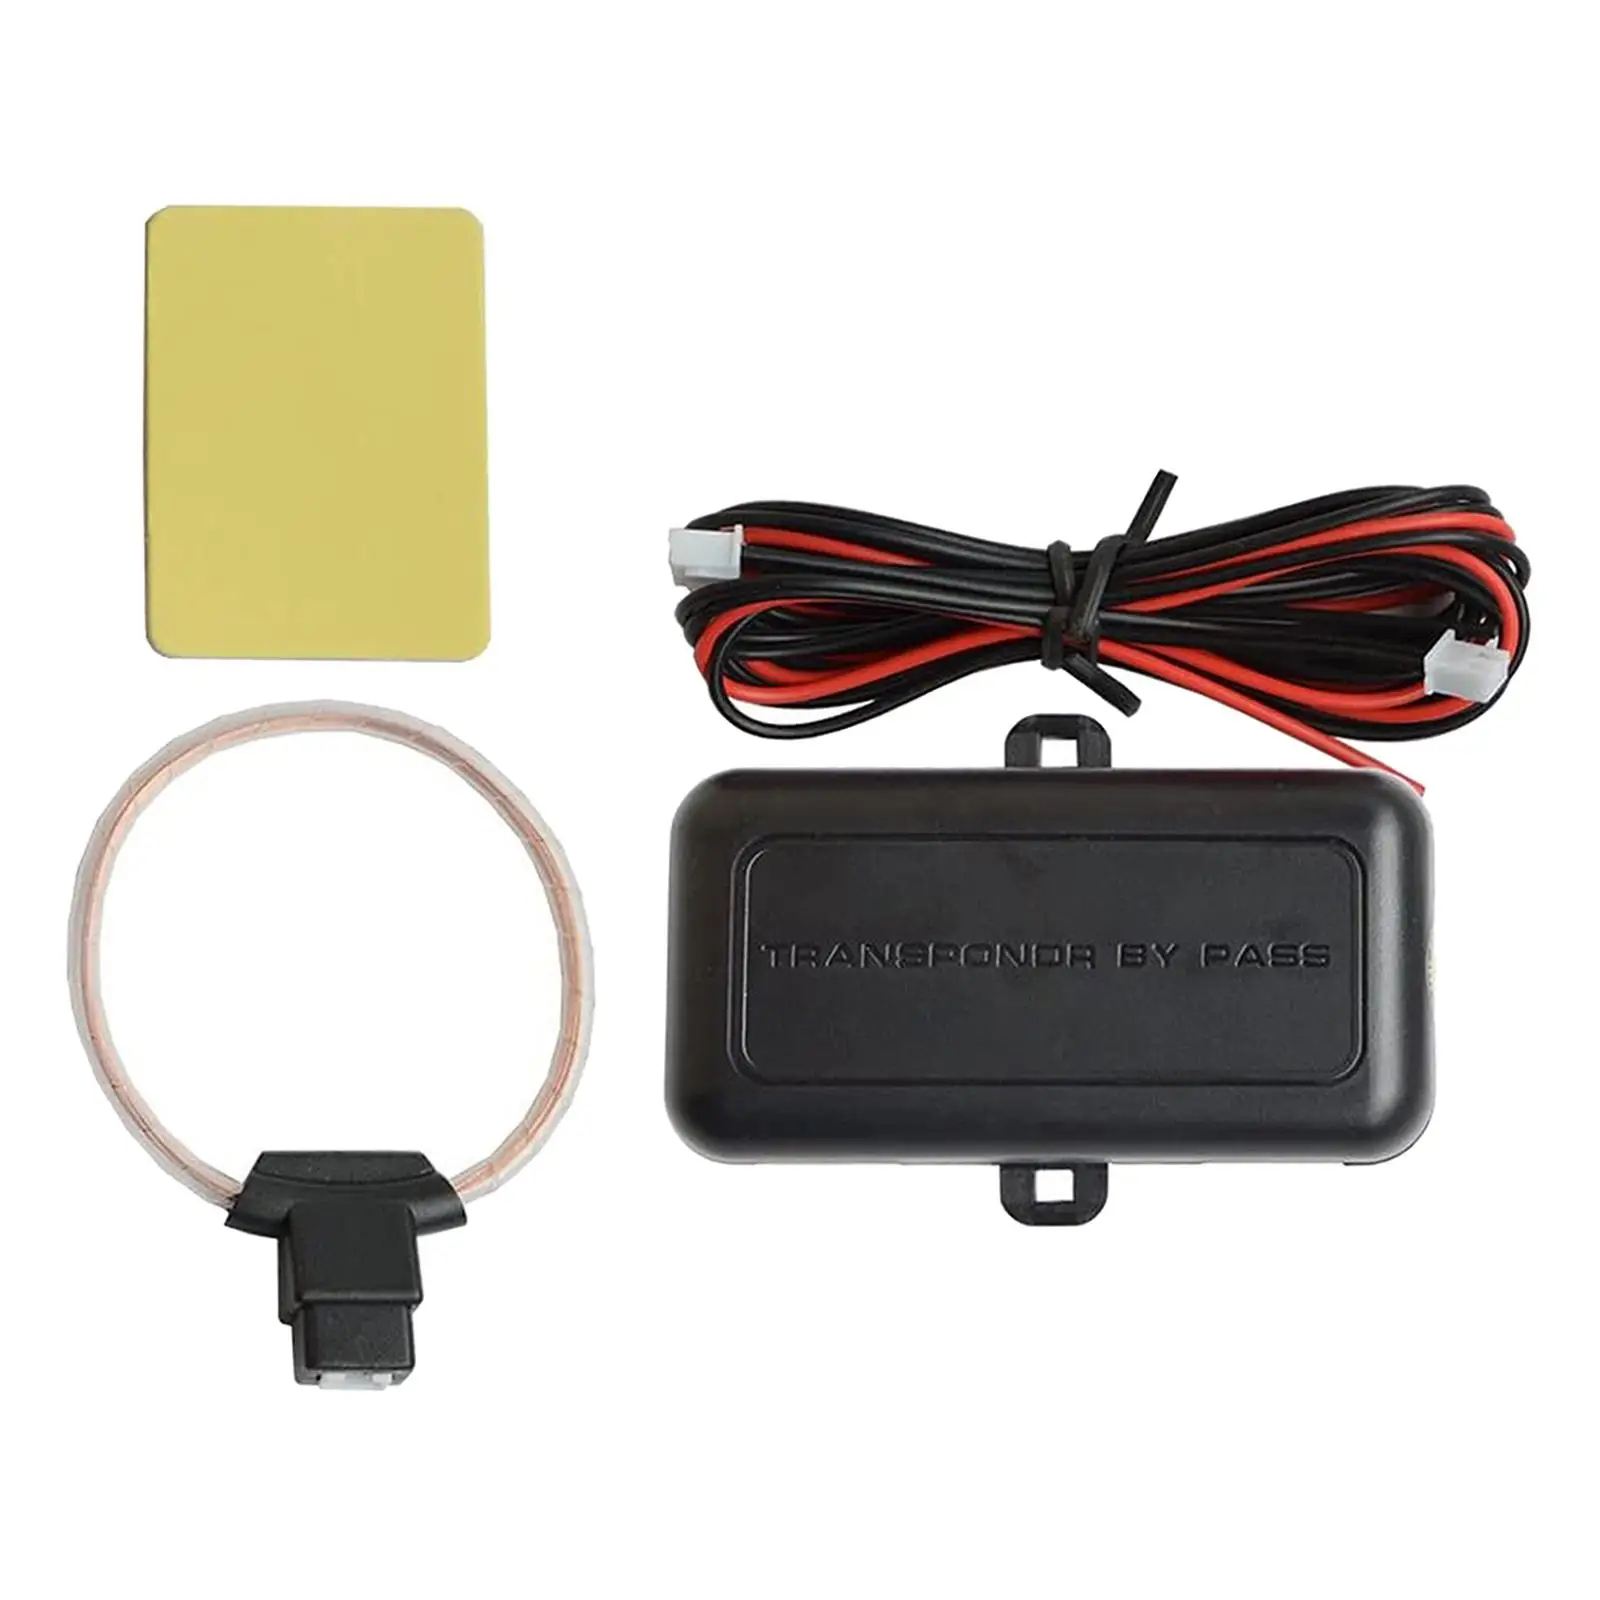 Immobilizer Module Signal Device for Cars W/Chip Keys